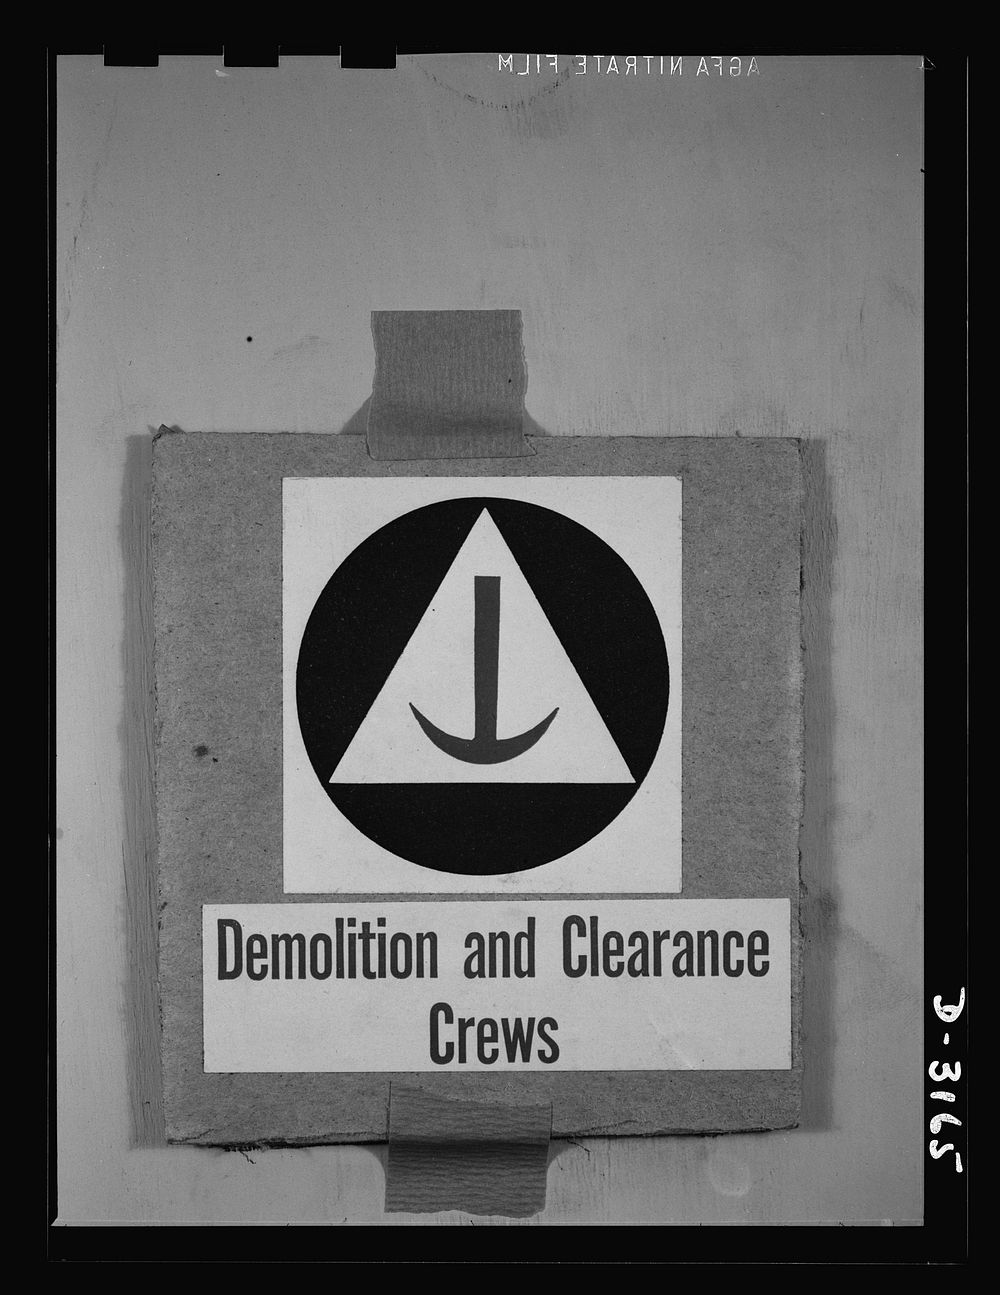 Insignia of Air Raid Protective Services. Sourced from the Library of Congress.